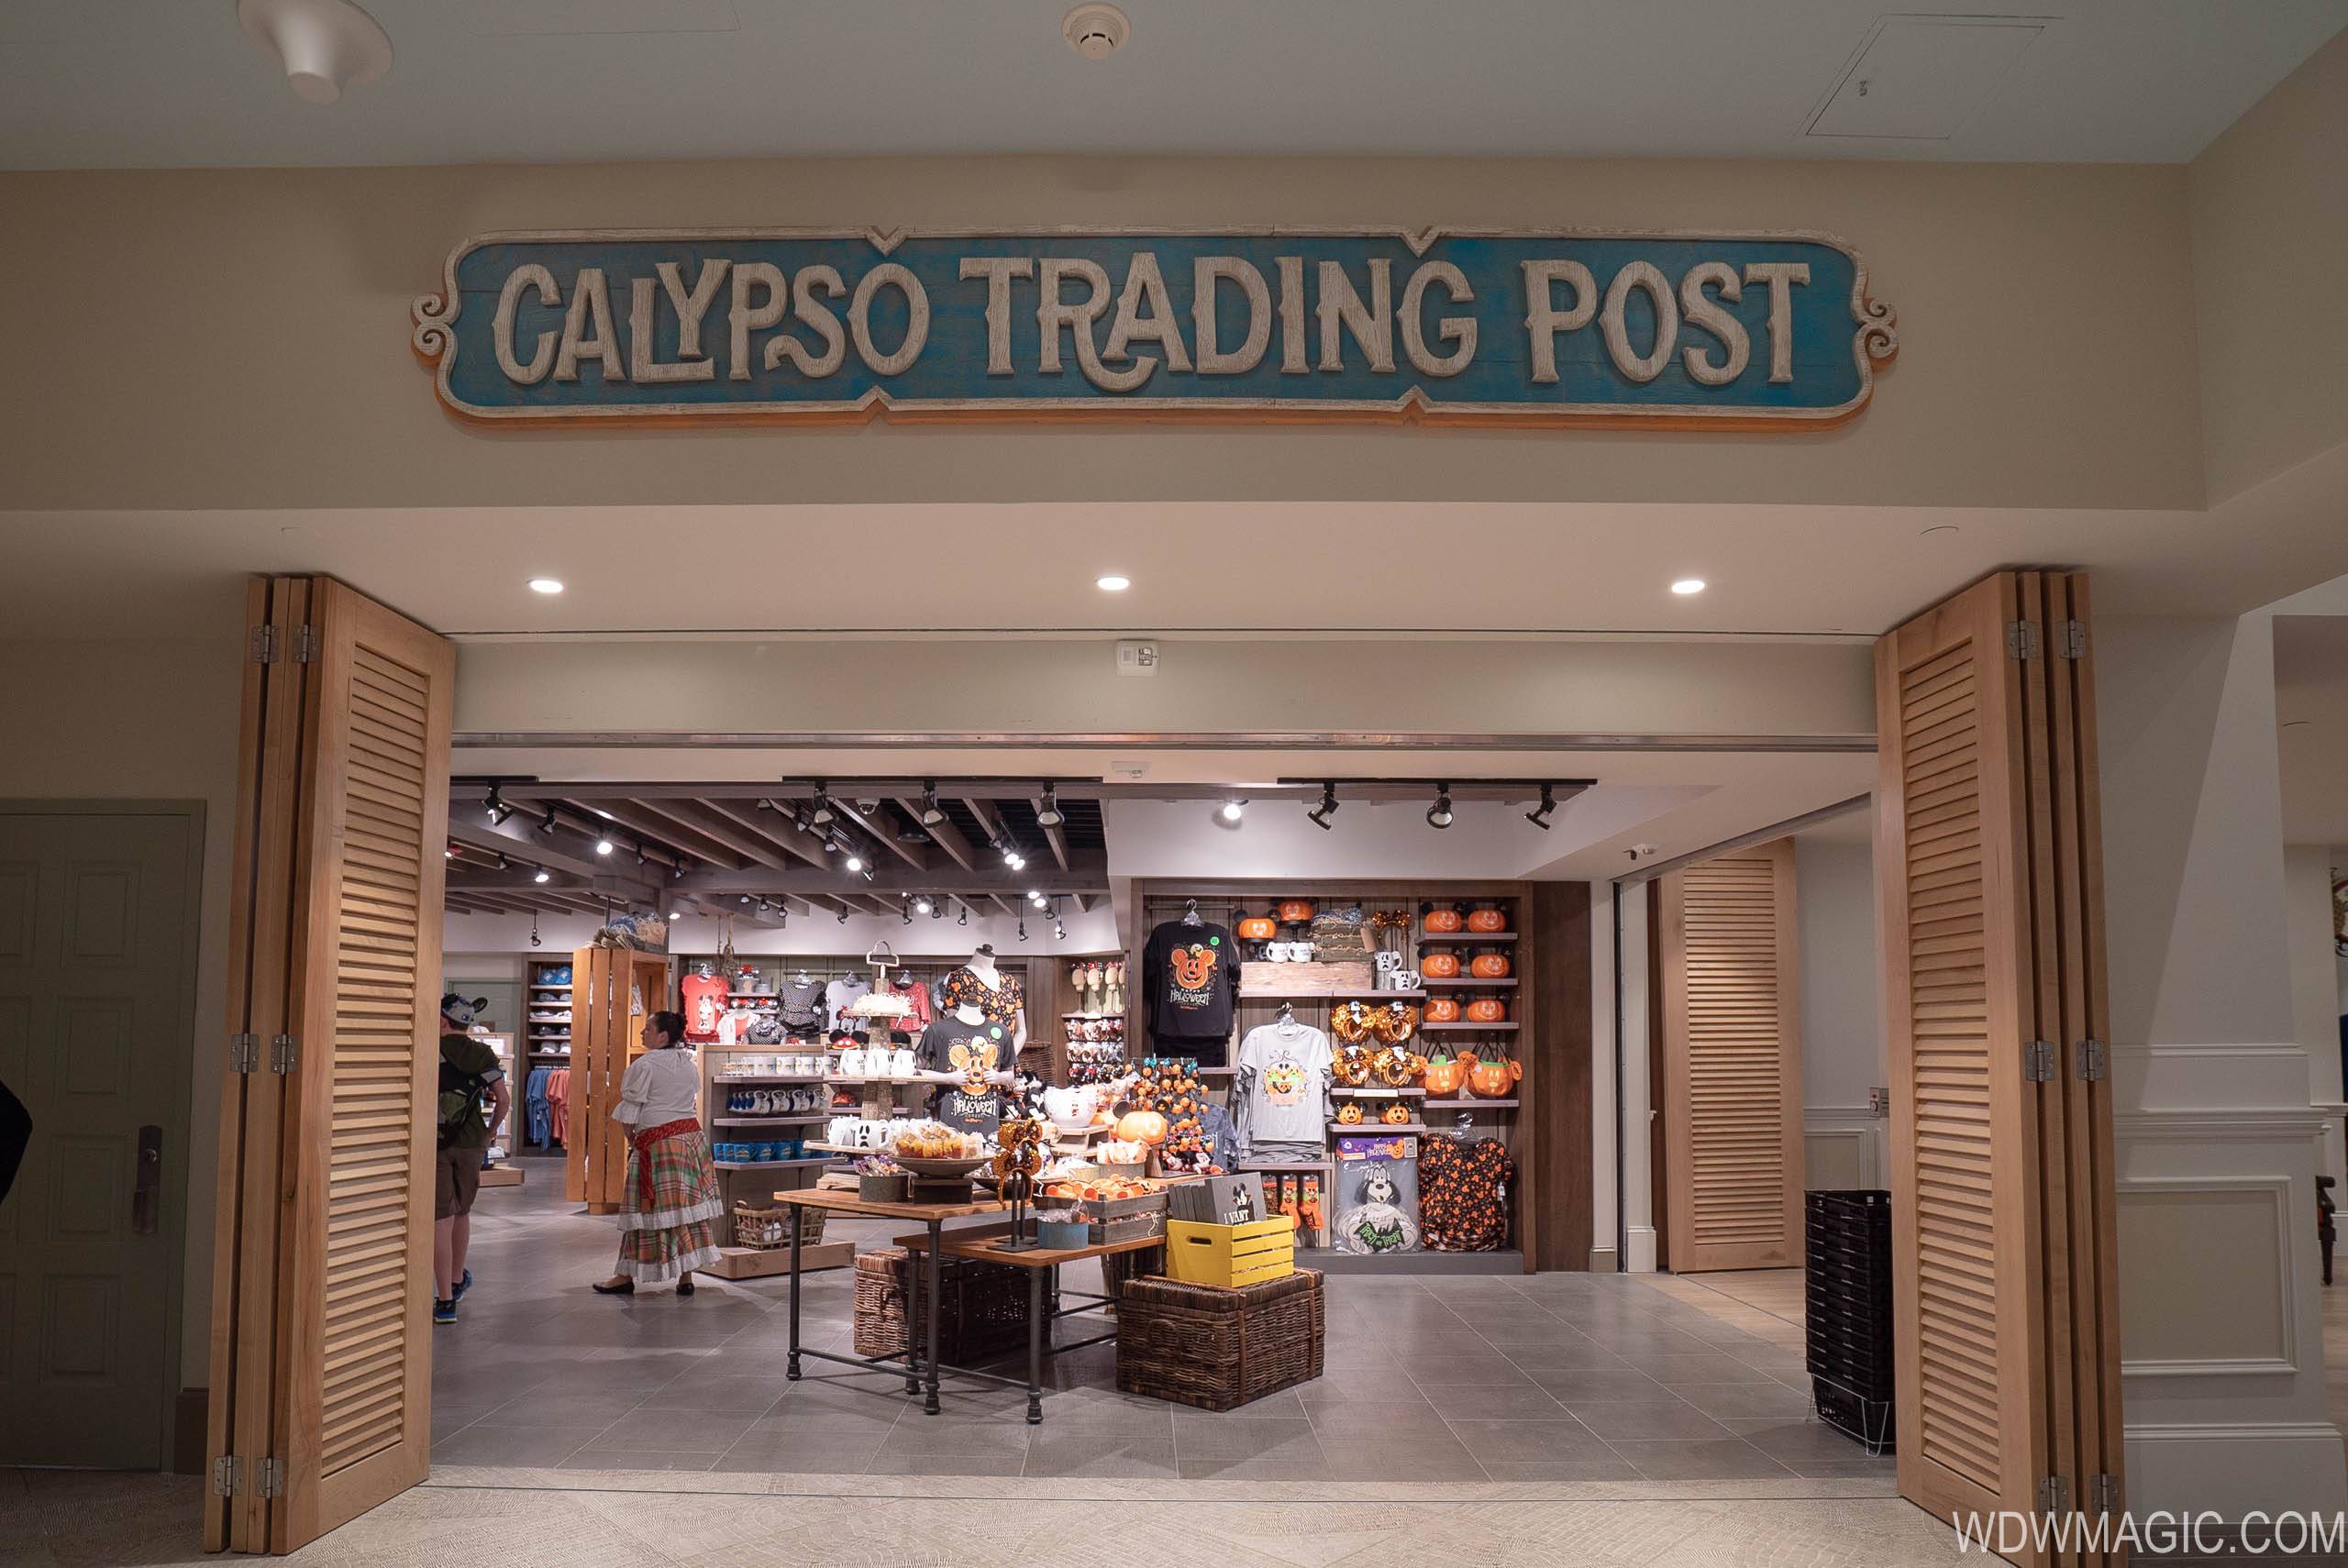 Calypso Trading Post overview